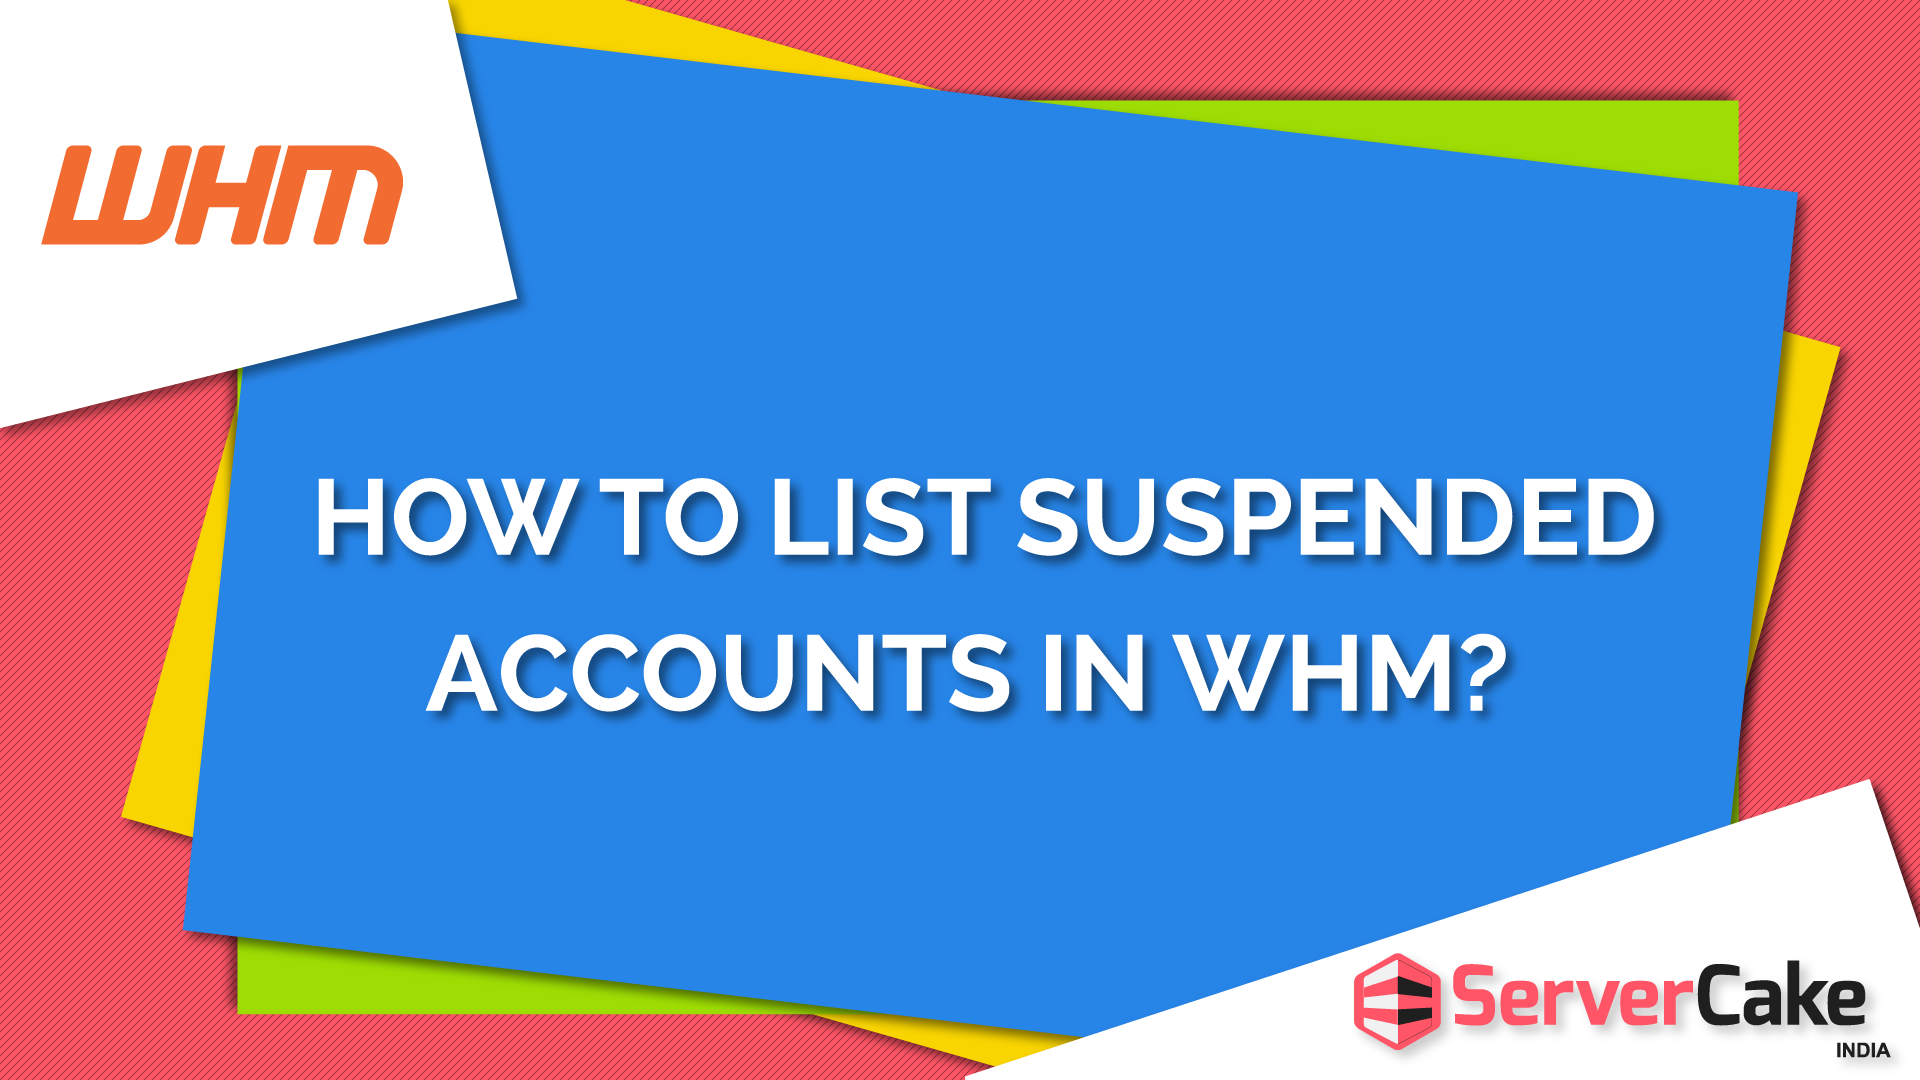 List Suspended Accounts in WHM